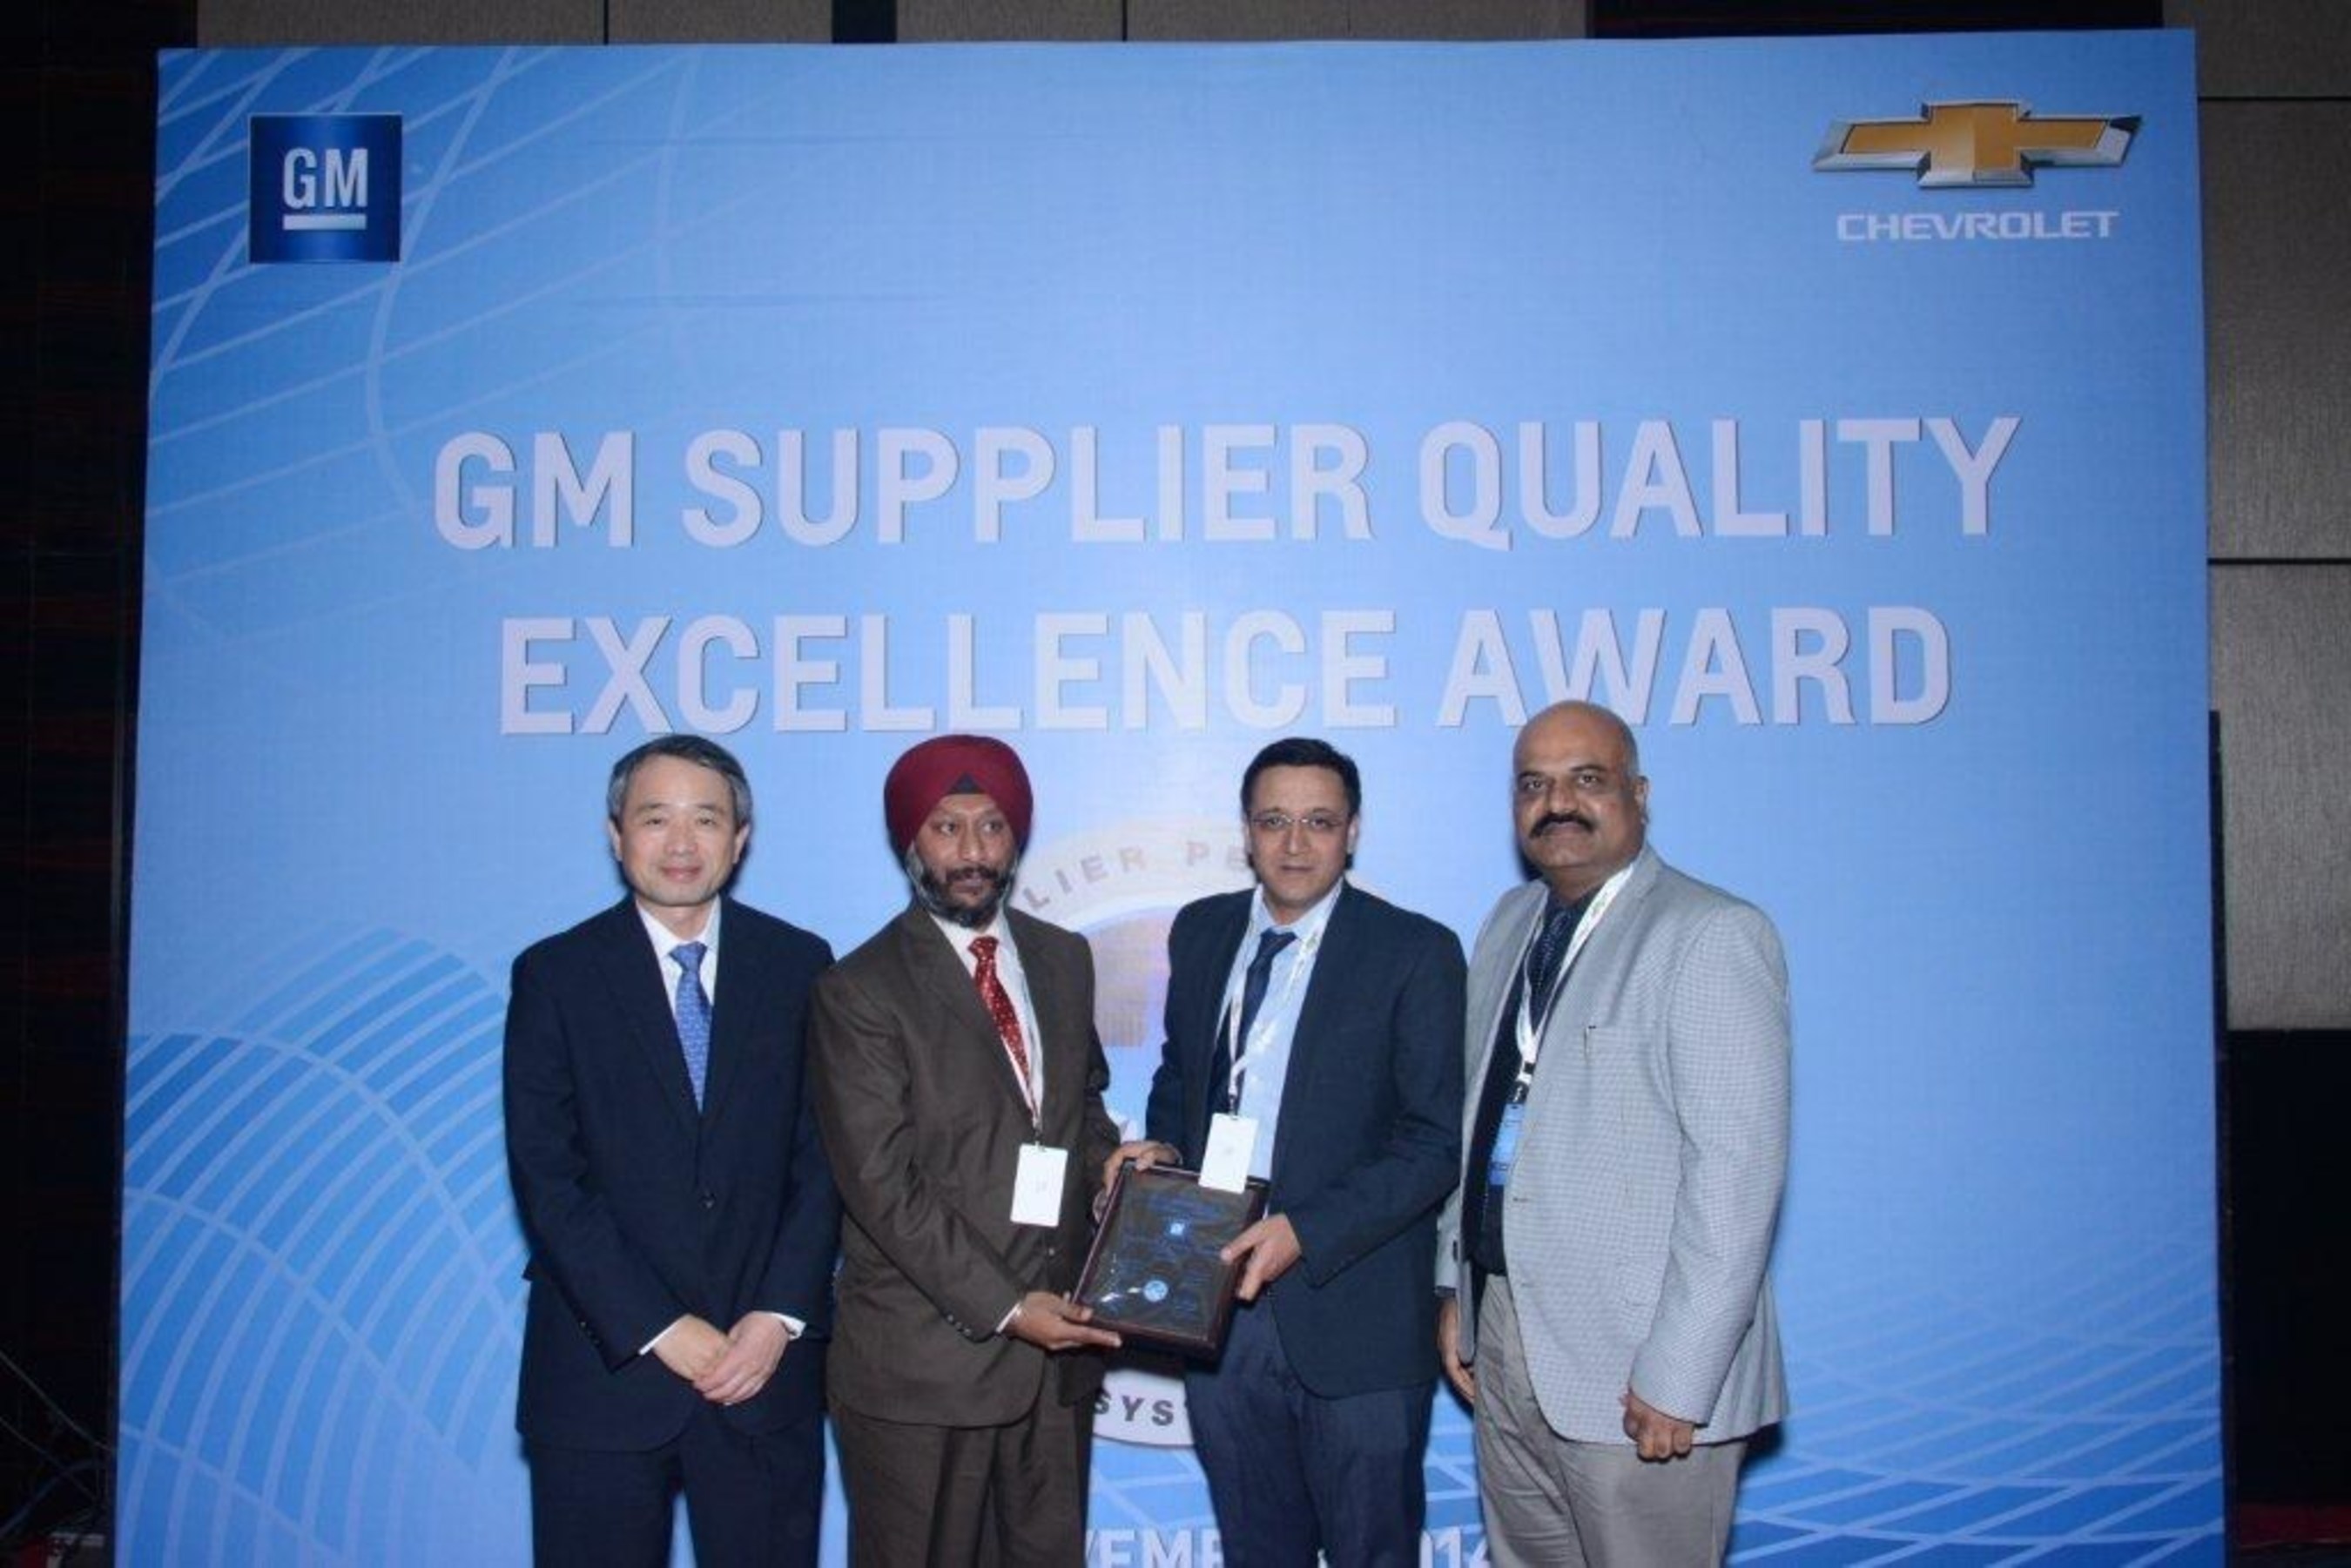 Yongjoo Huang, Director Powertrain, GM International Operations (far left), and Praveen Patravali, Plant Head, GM India Powertrain Plant (far right), presented the 2014 Supplier Quality Excellence Award from GM India to Darshan Pal Singh, Quality Manager, BorgWarner Emissions Systems India (middle left), and Anshul Gupta, Head of Sales, Marketing and Program Management, BorgWarner Emissions Systems India (middle right).